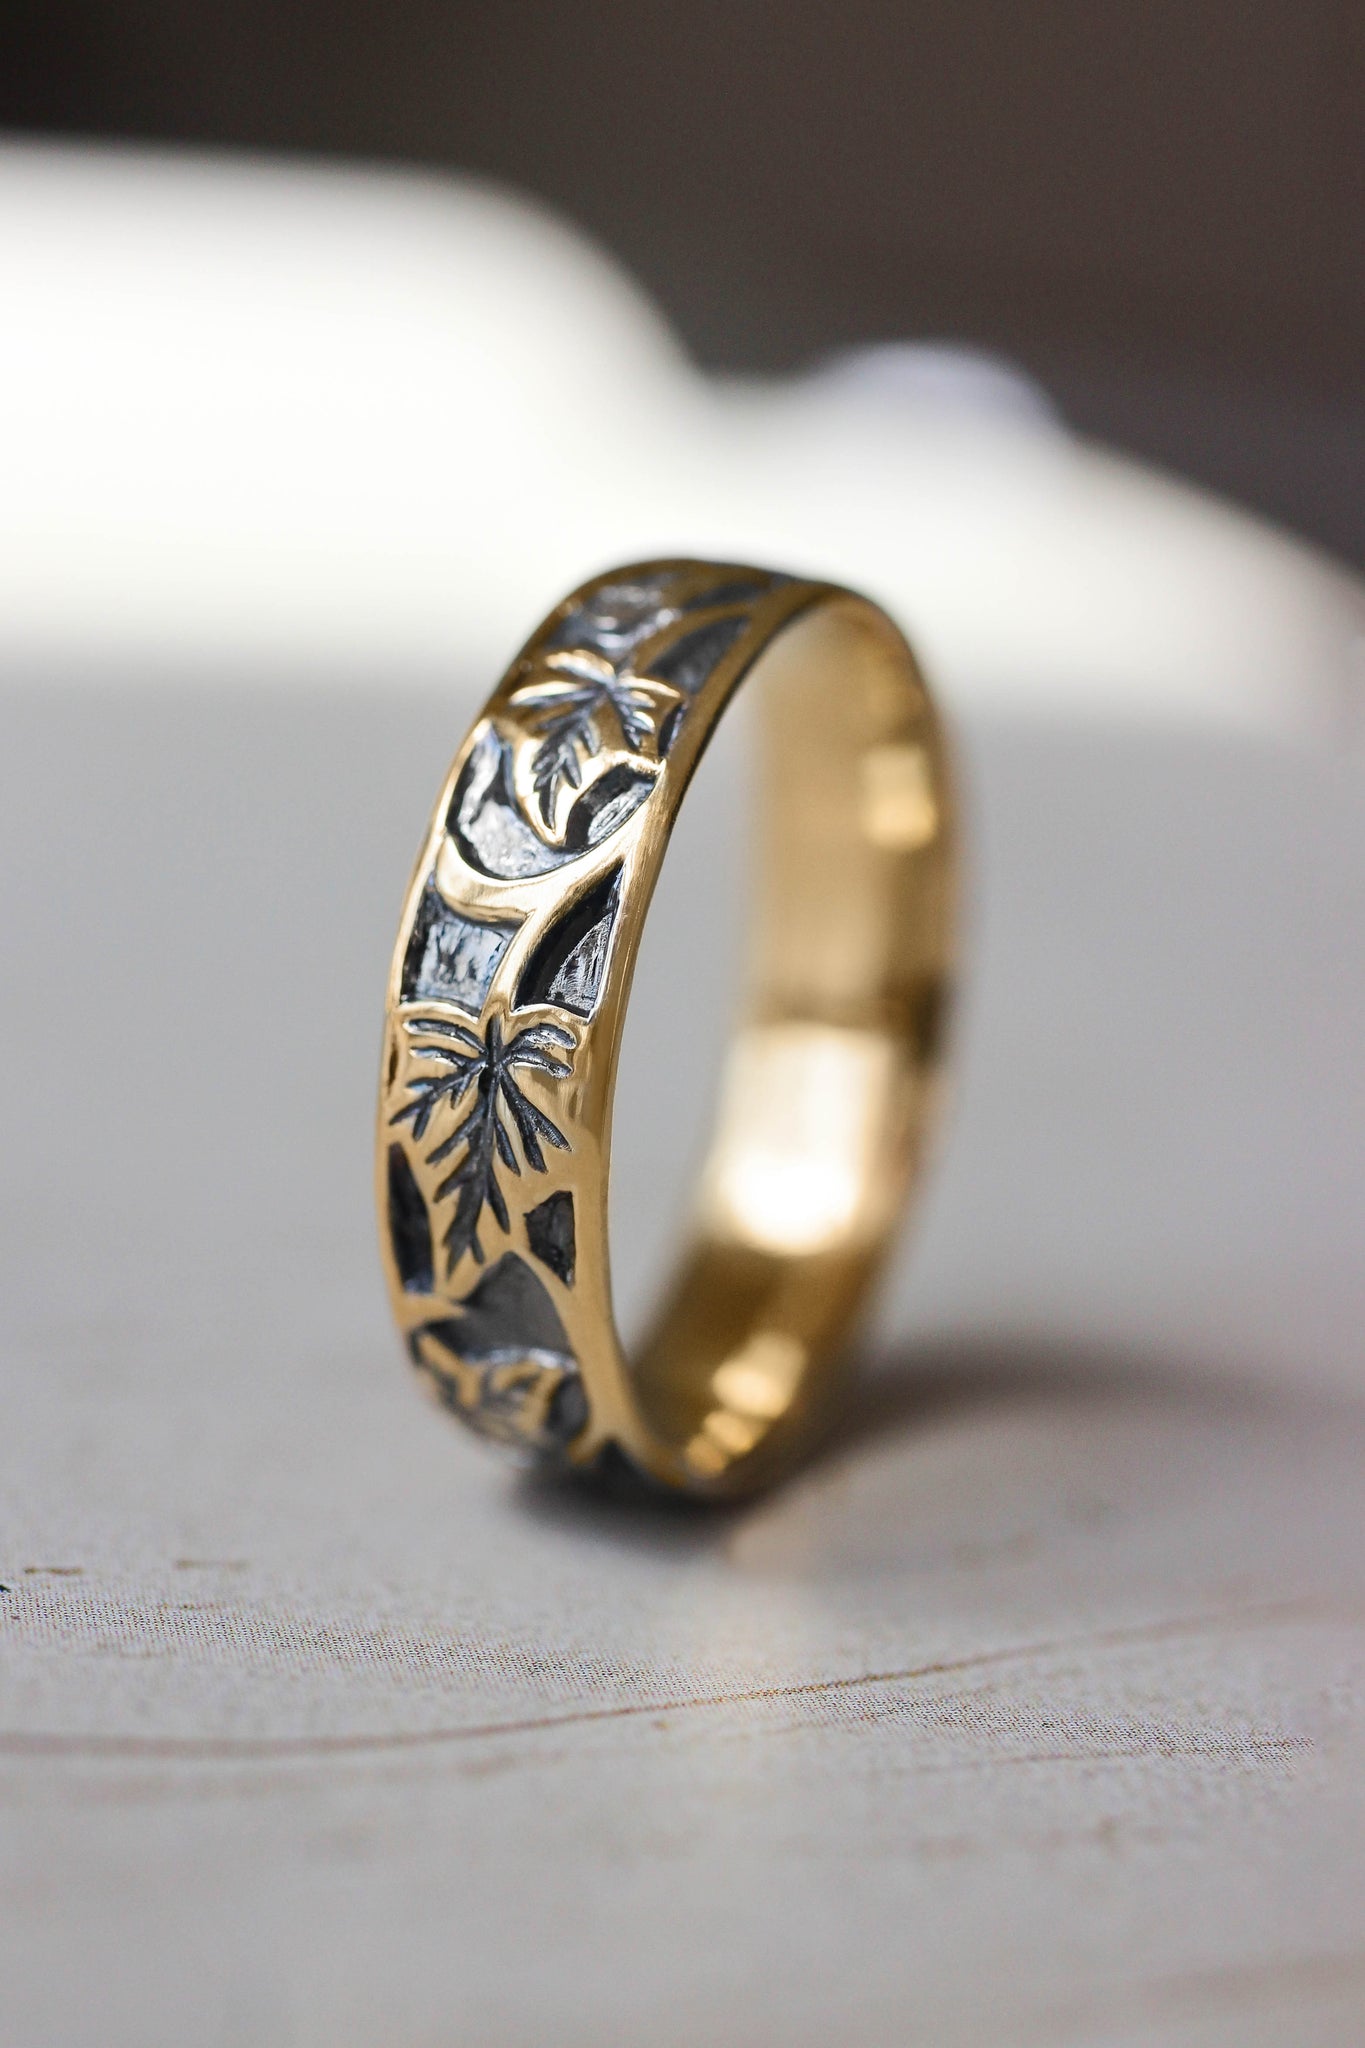 Gold leaf wedding band for man, ivy leaves ring - Eden Garden Jewelry™